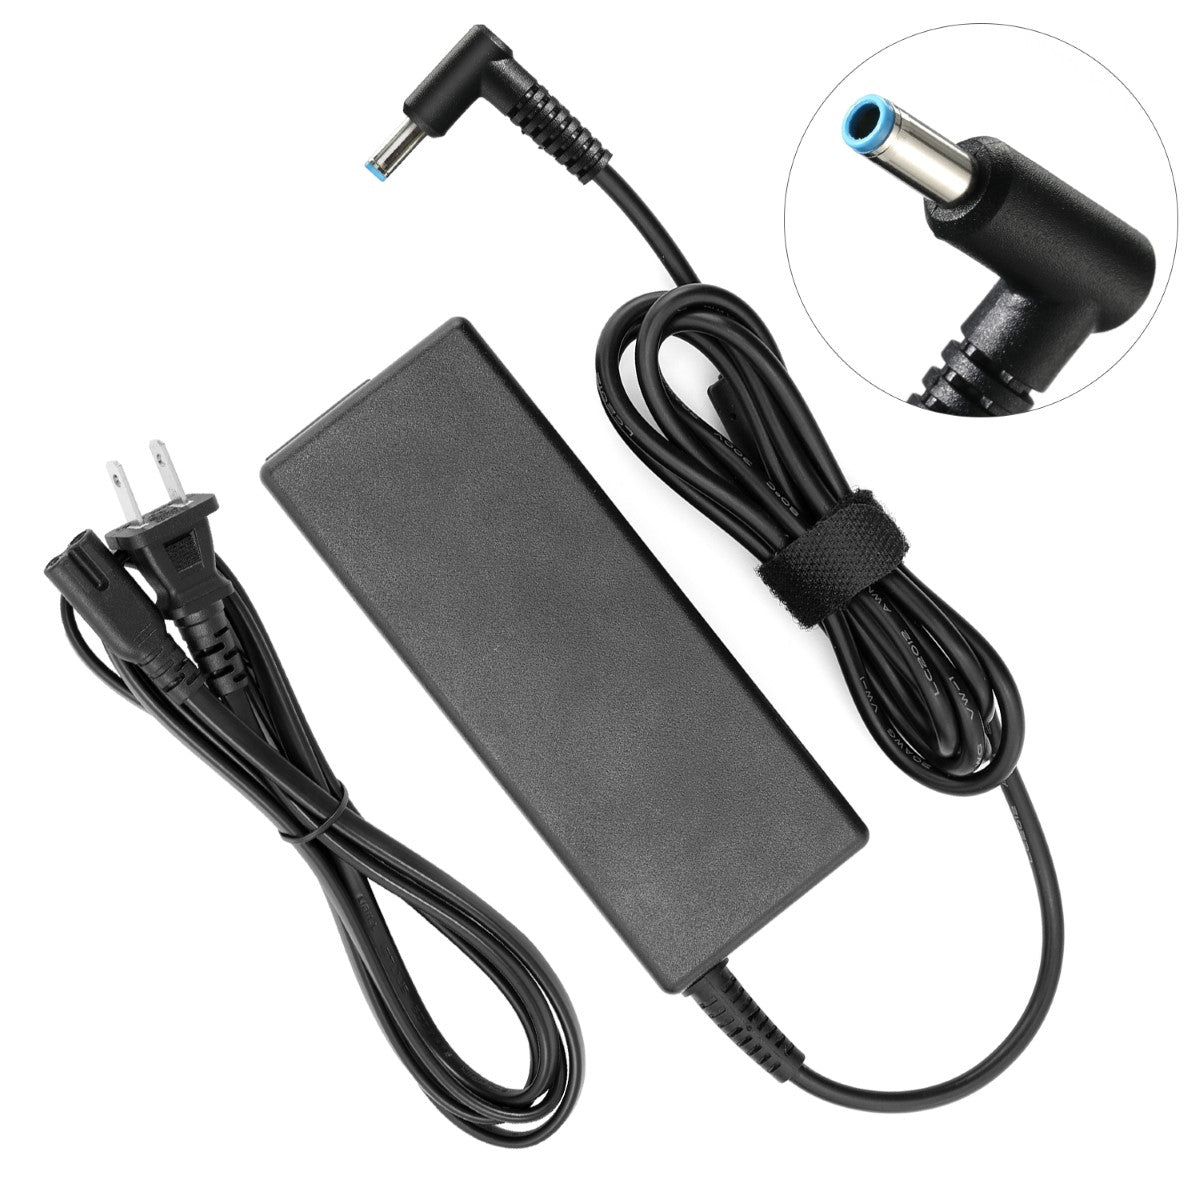 AC Adapter Charger for HP Pavilion Touchsmart 17-f024ds Notebook.